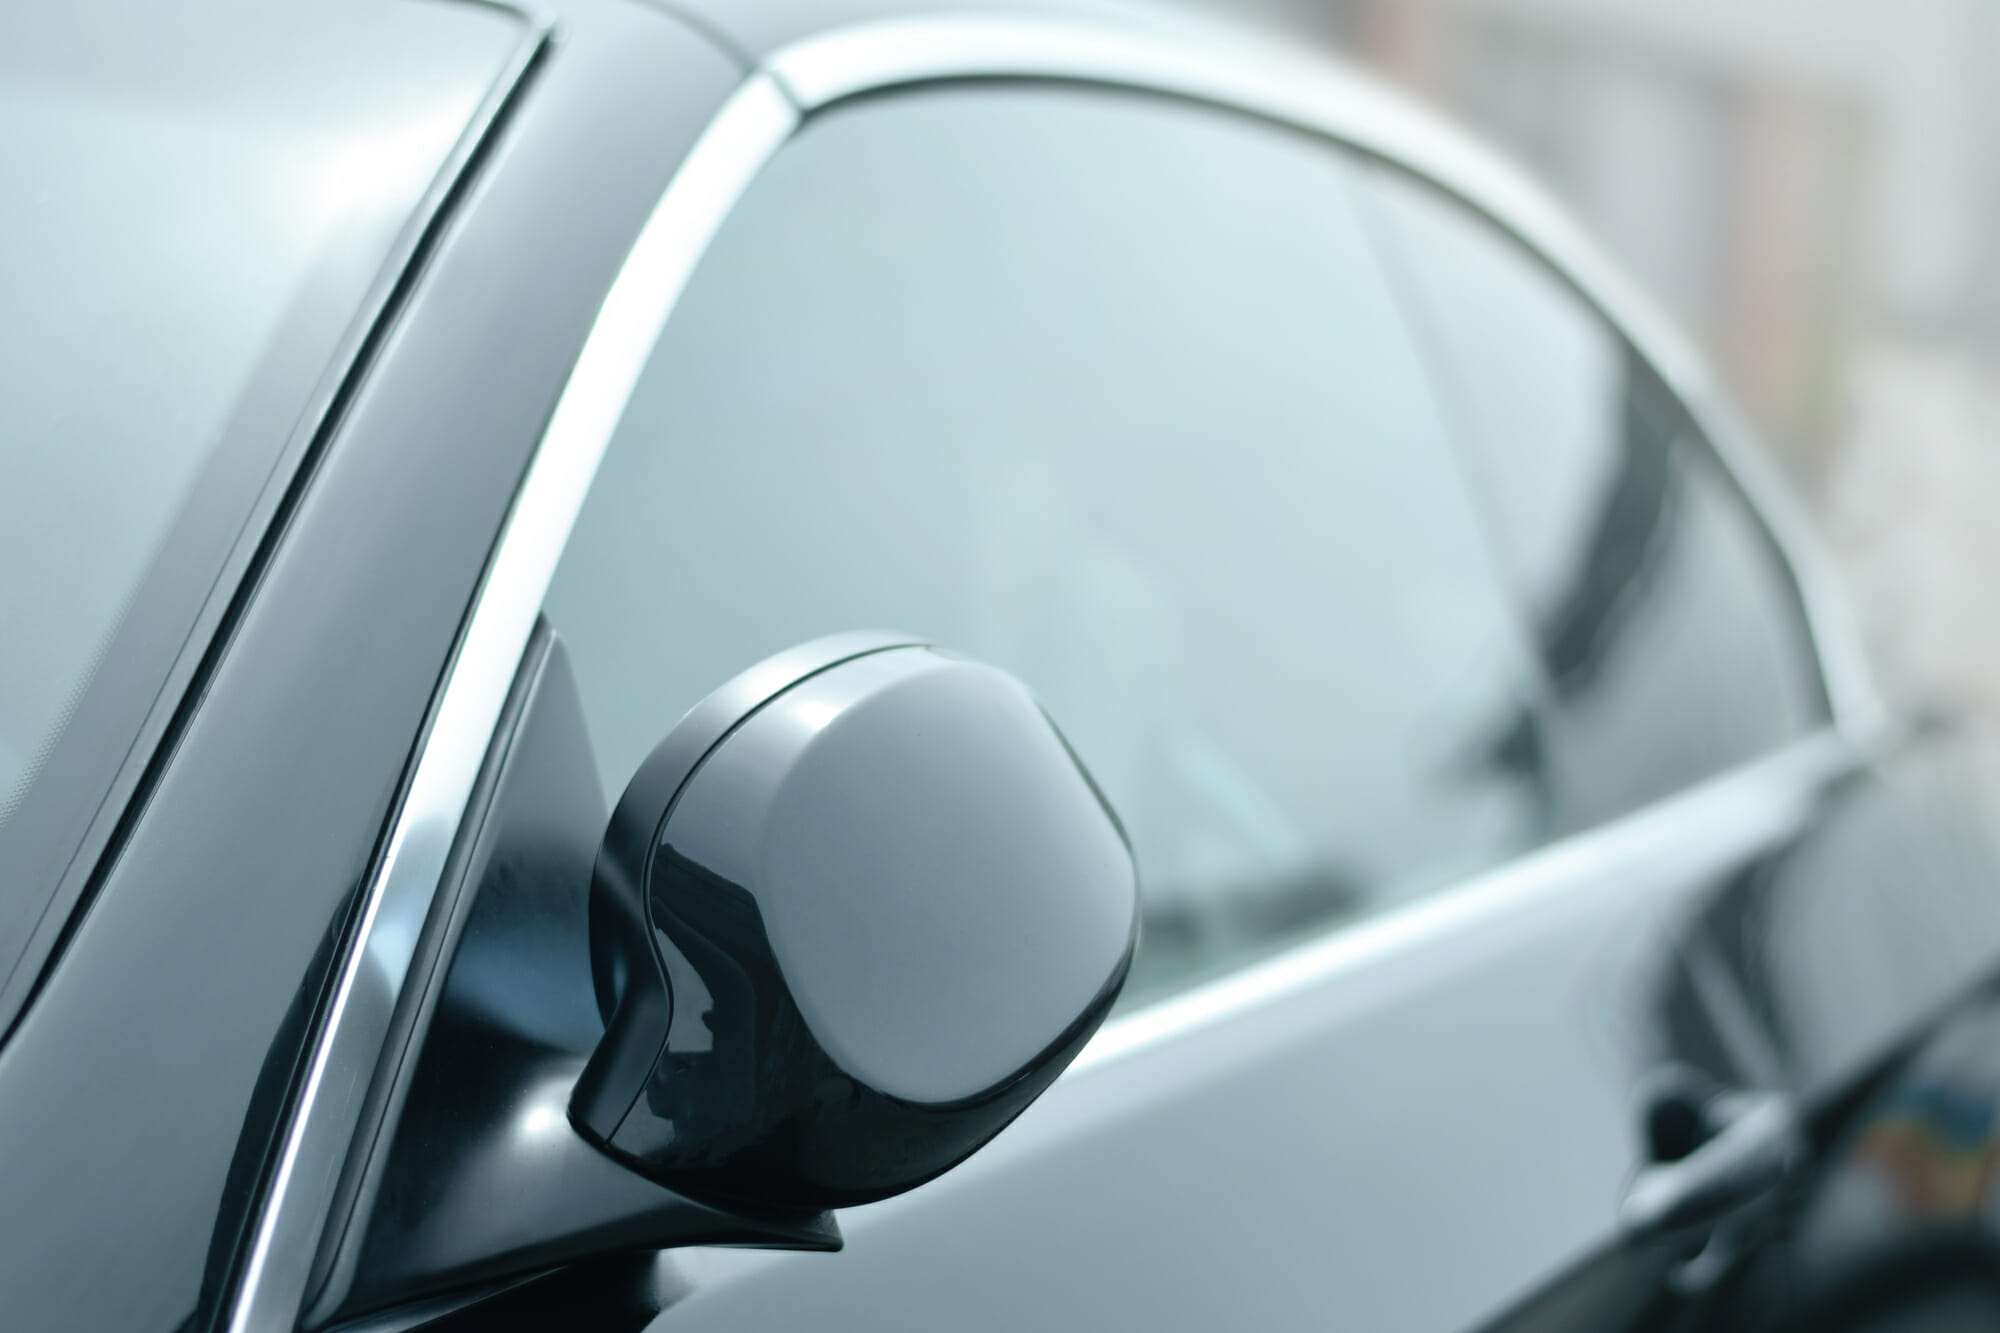 How to Stop Car Windows from Steaming Up